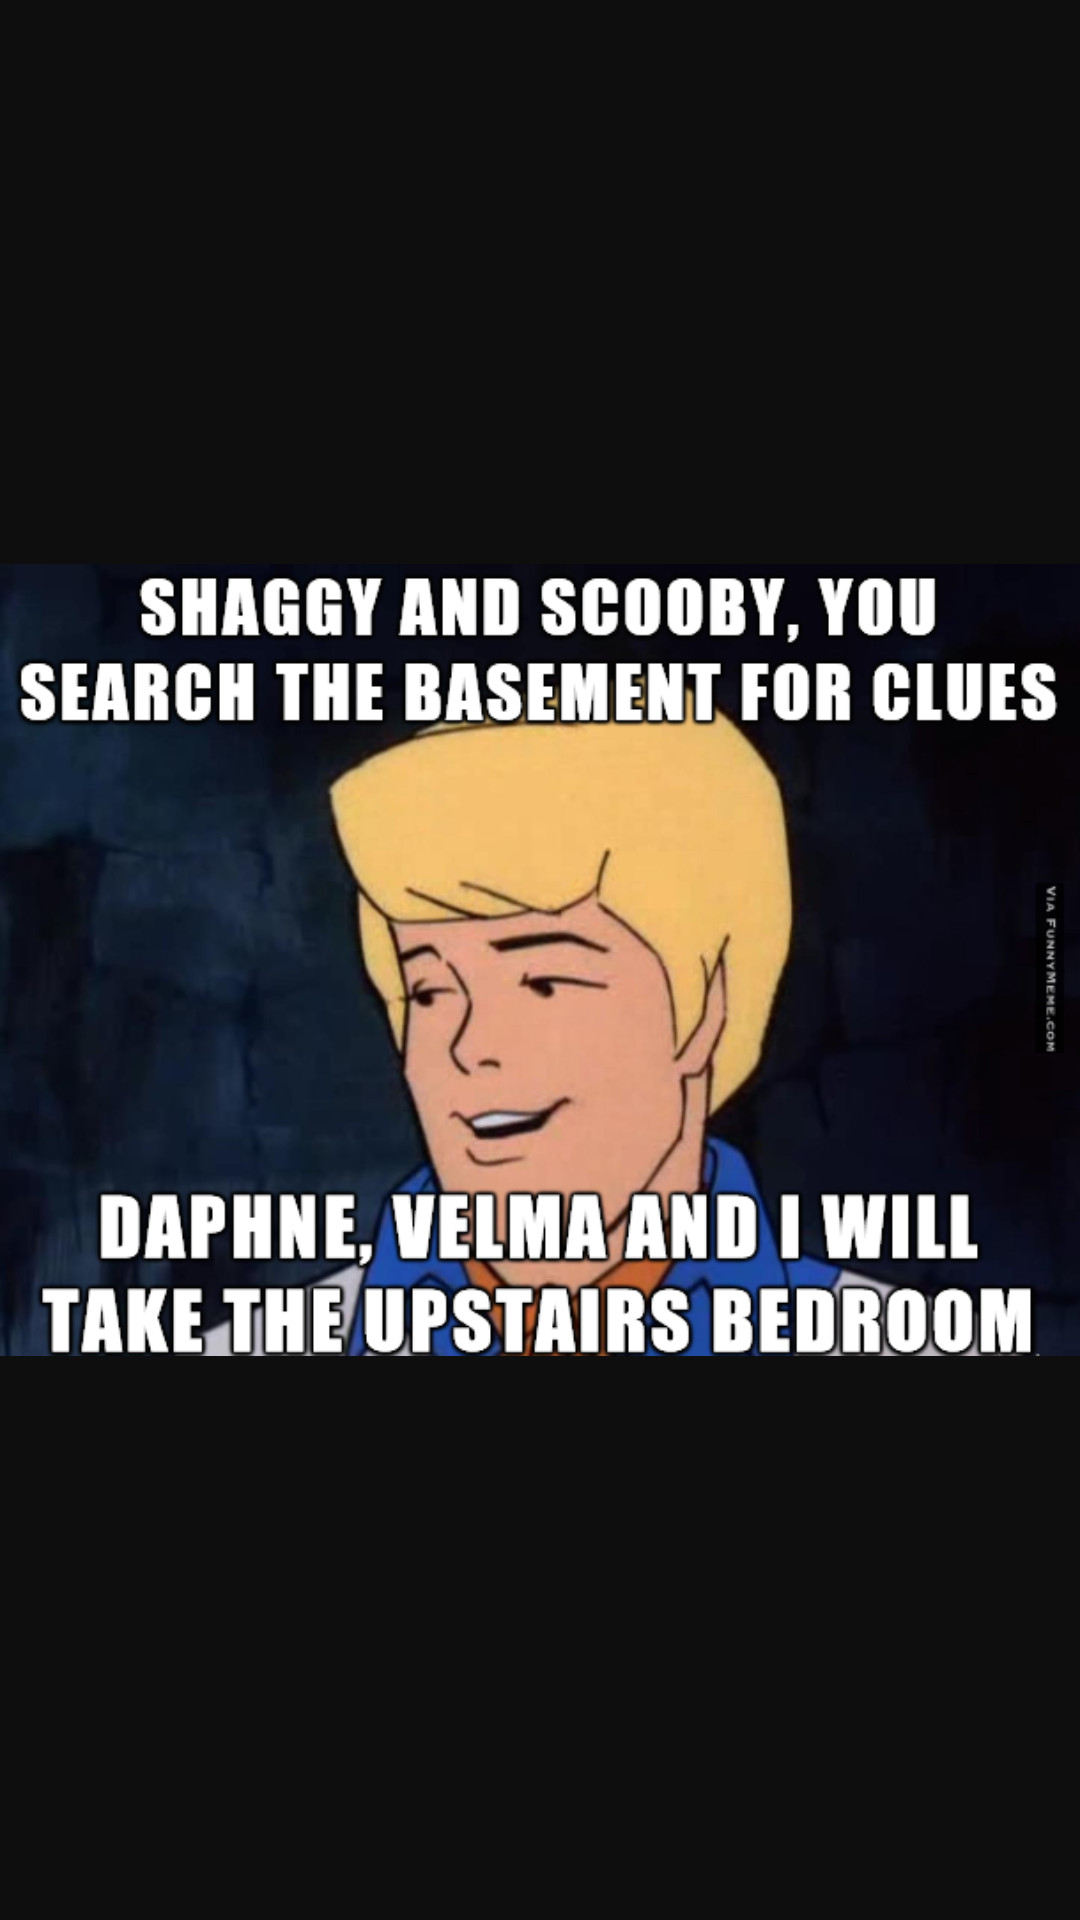 Fred trynna mess up my child hood - meme